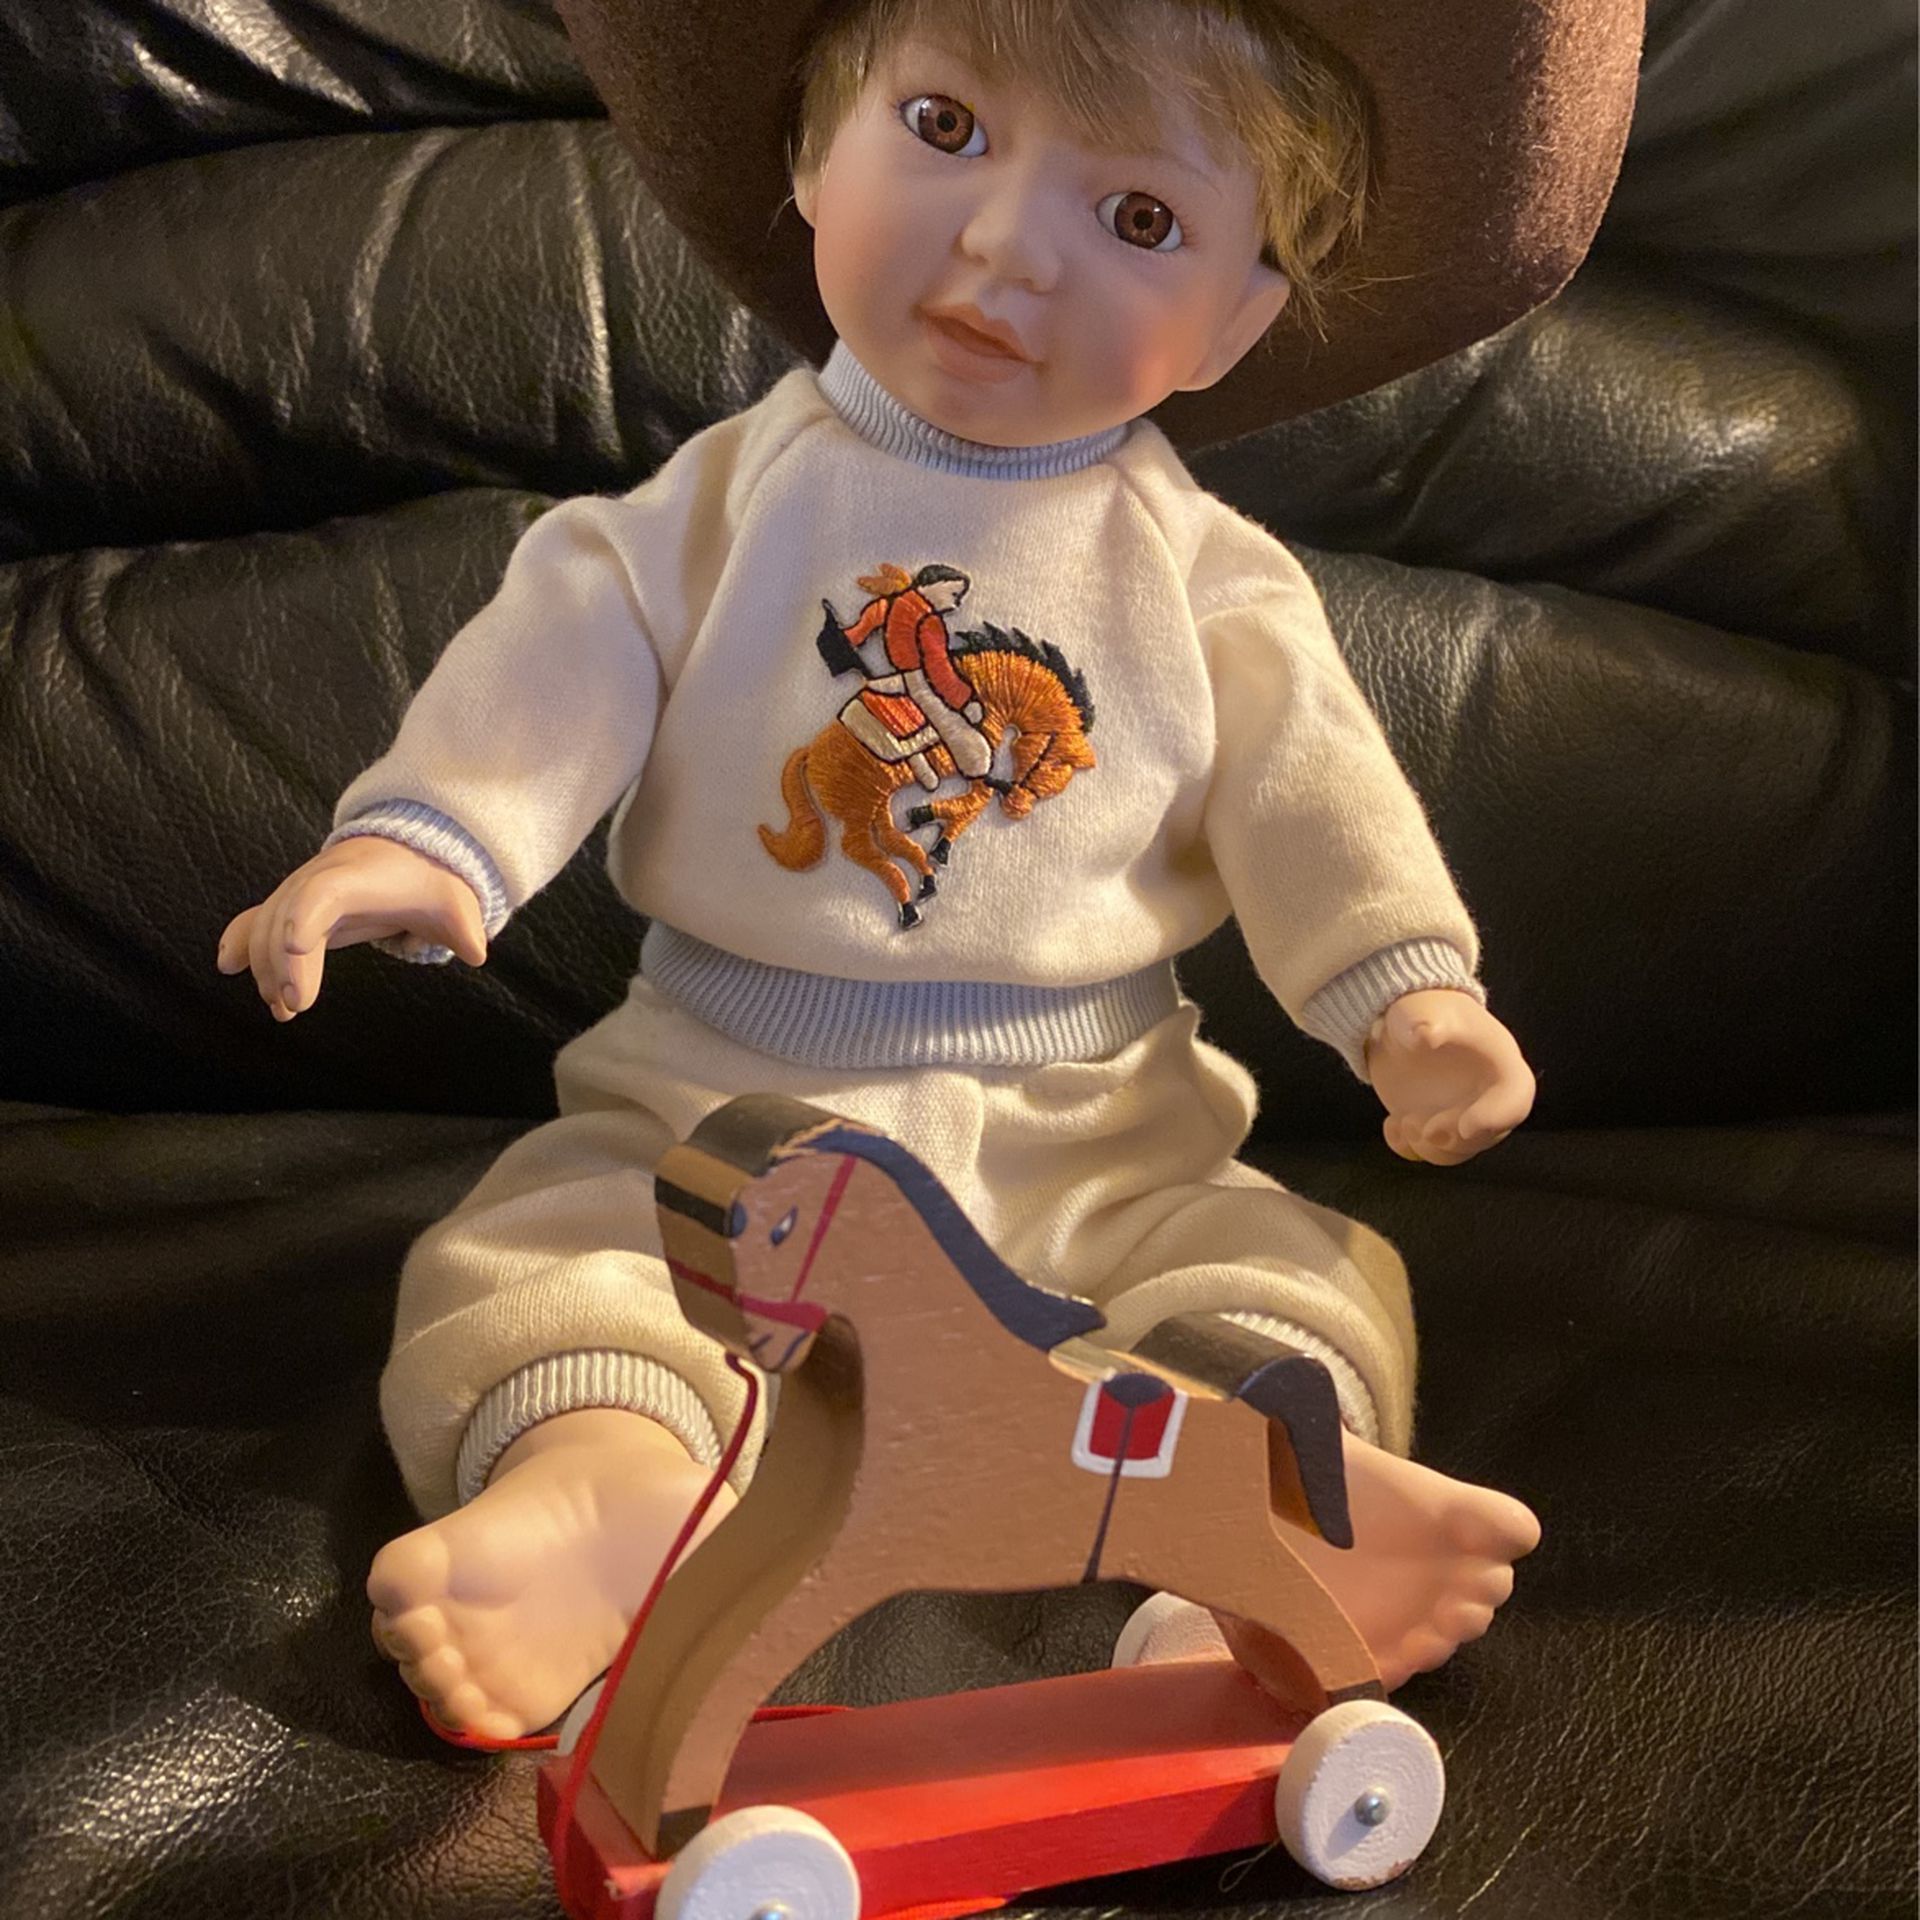 Porcelain Cowboy Baby Doll with hat & toy horse on wheels. Neck Signed B/O